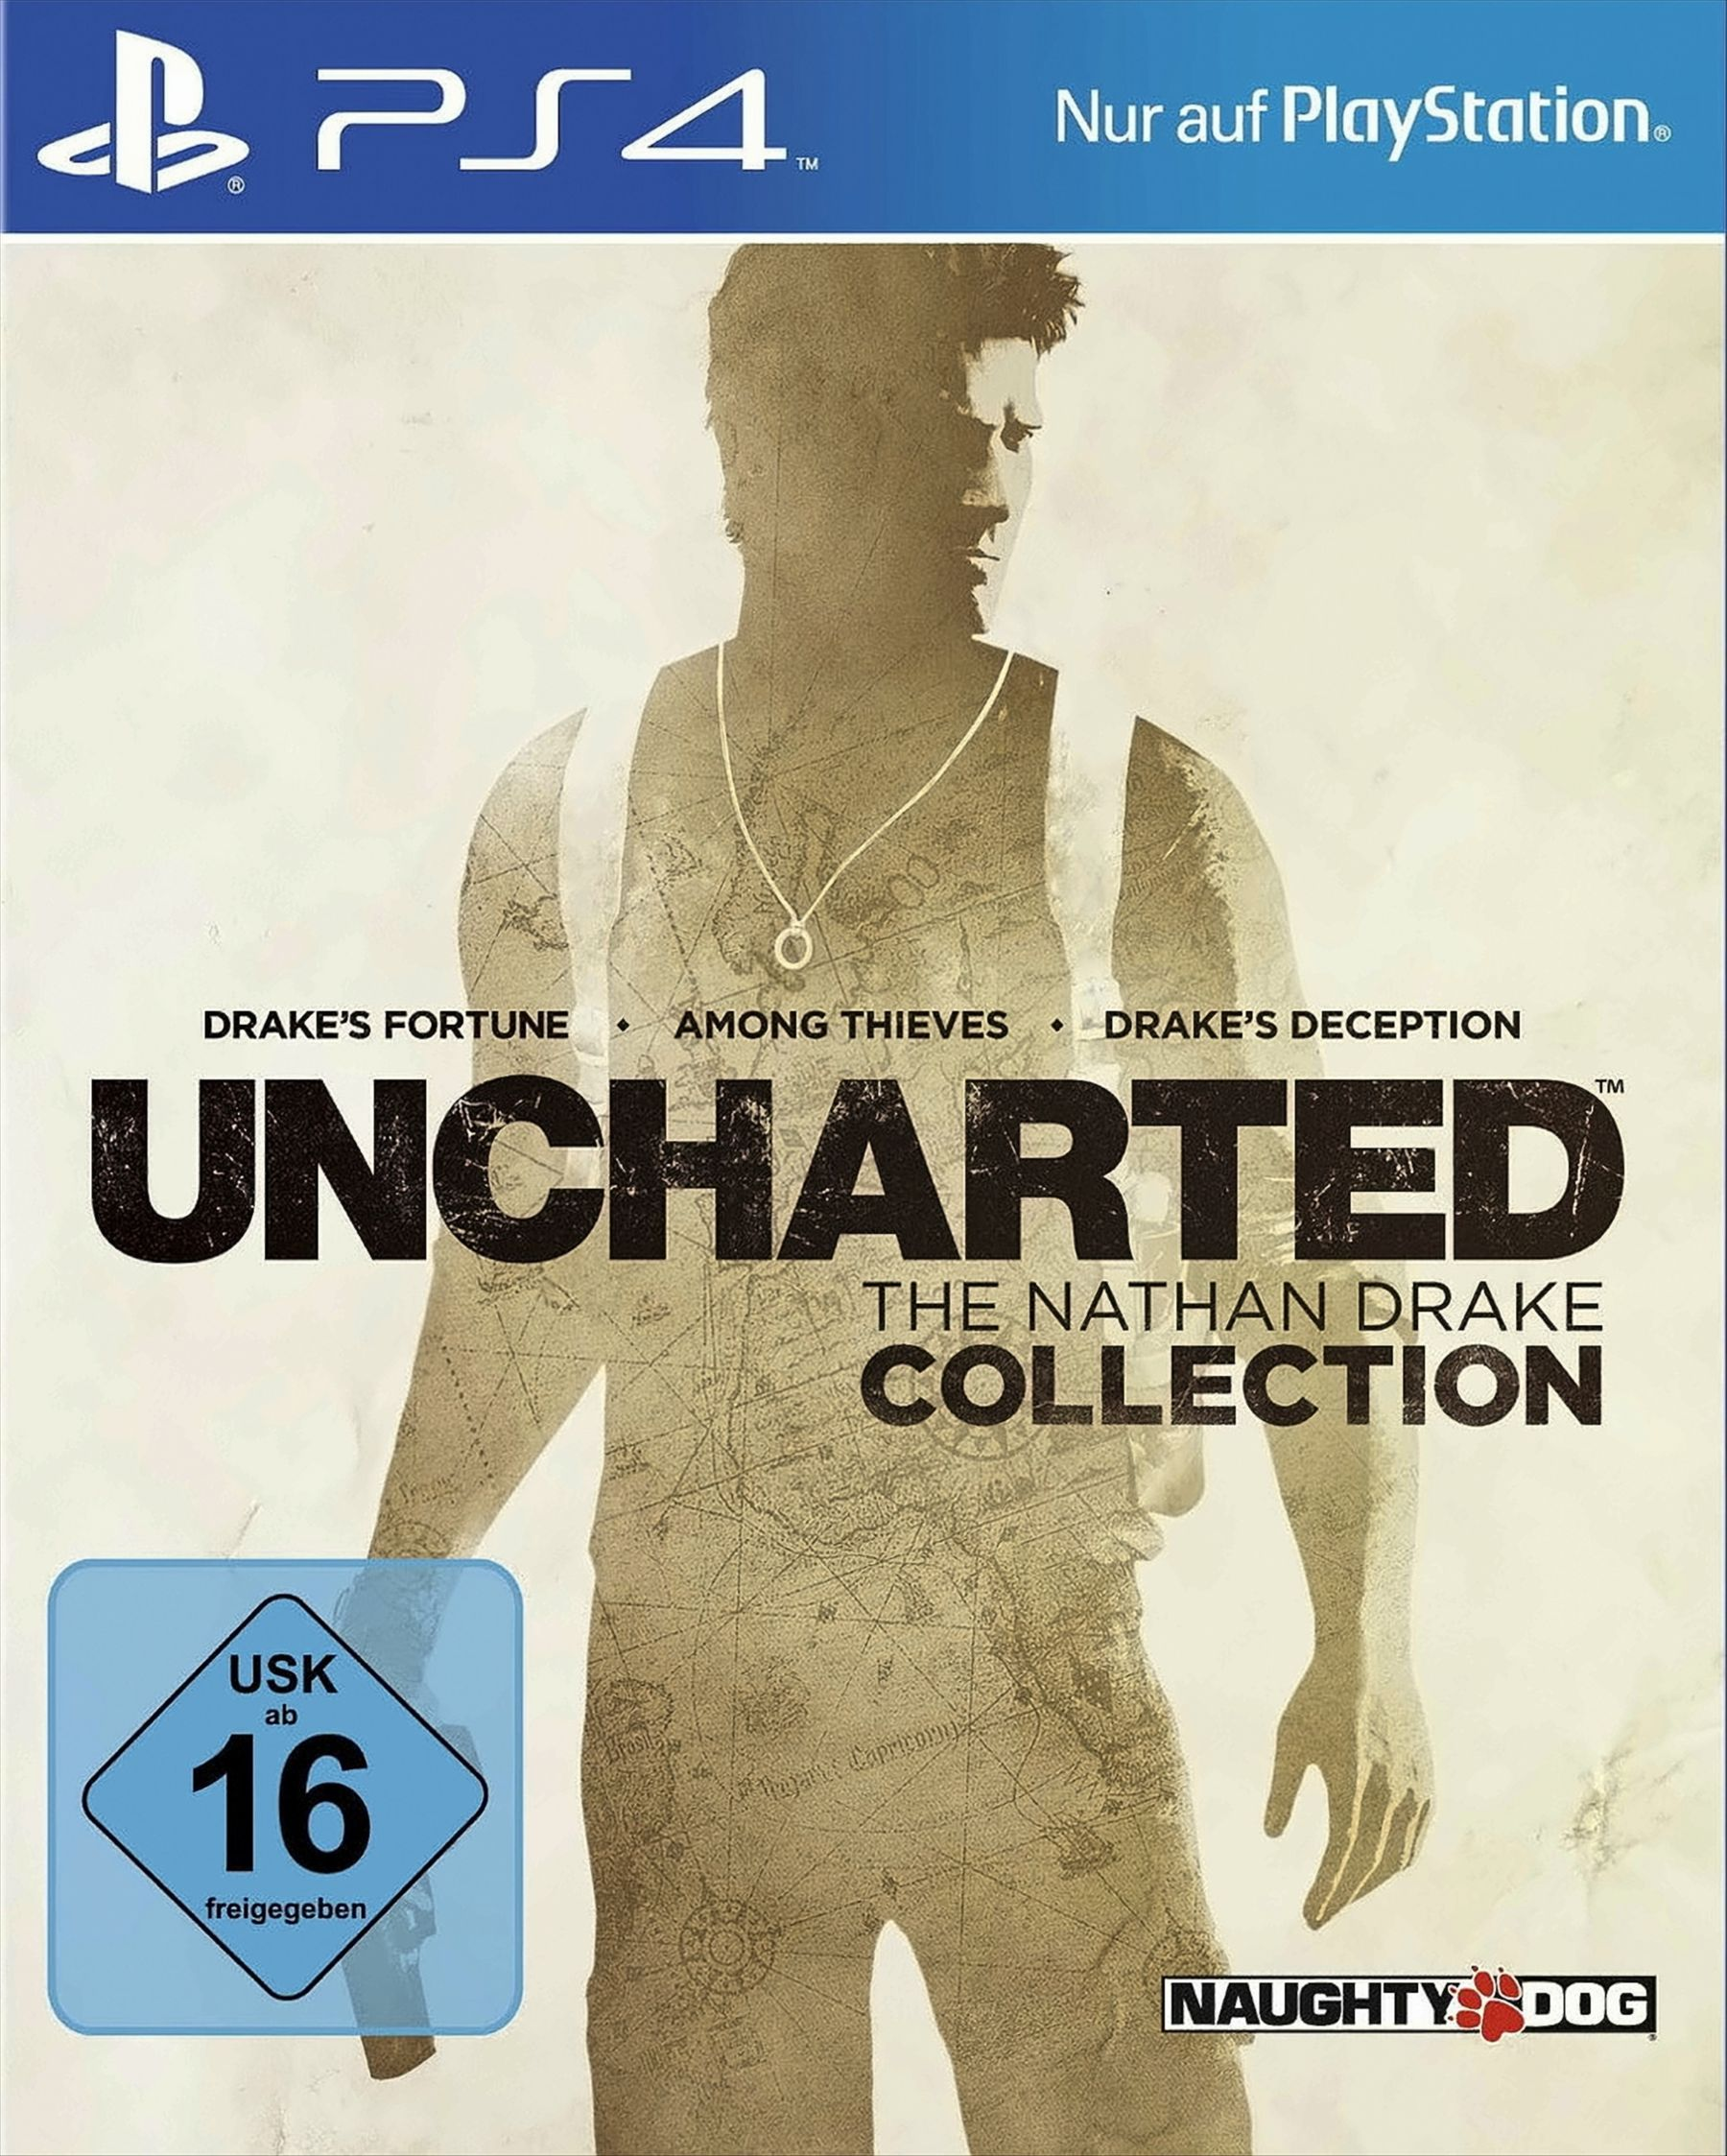 Uncharted: Drake 4] - [PlayStation The Nathan Collection